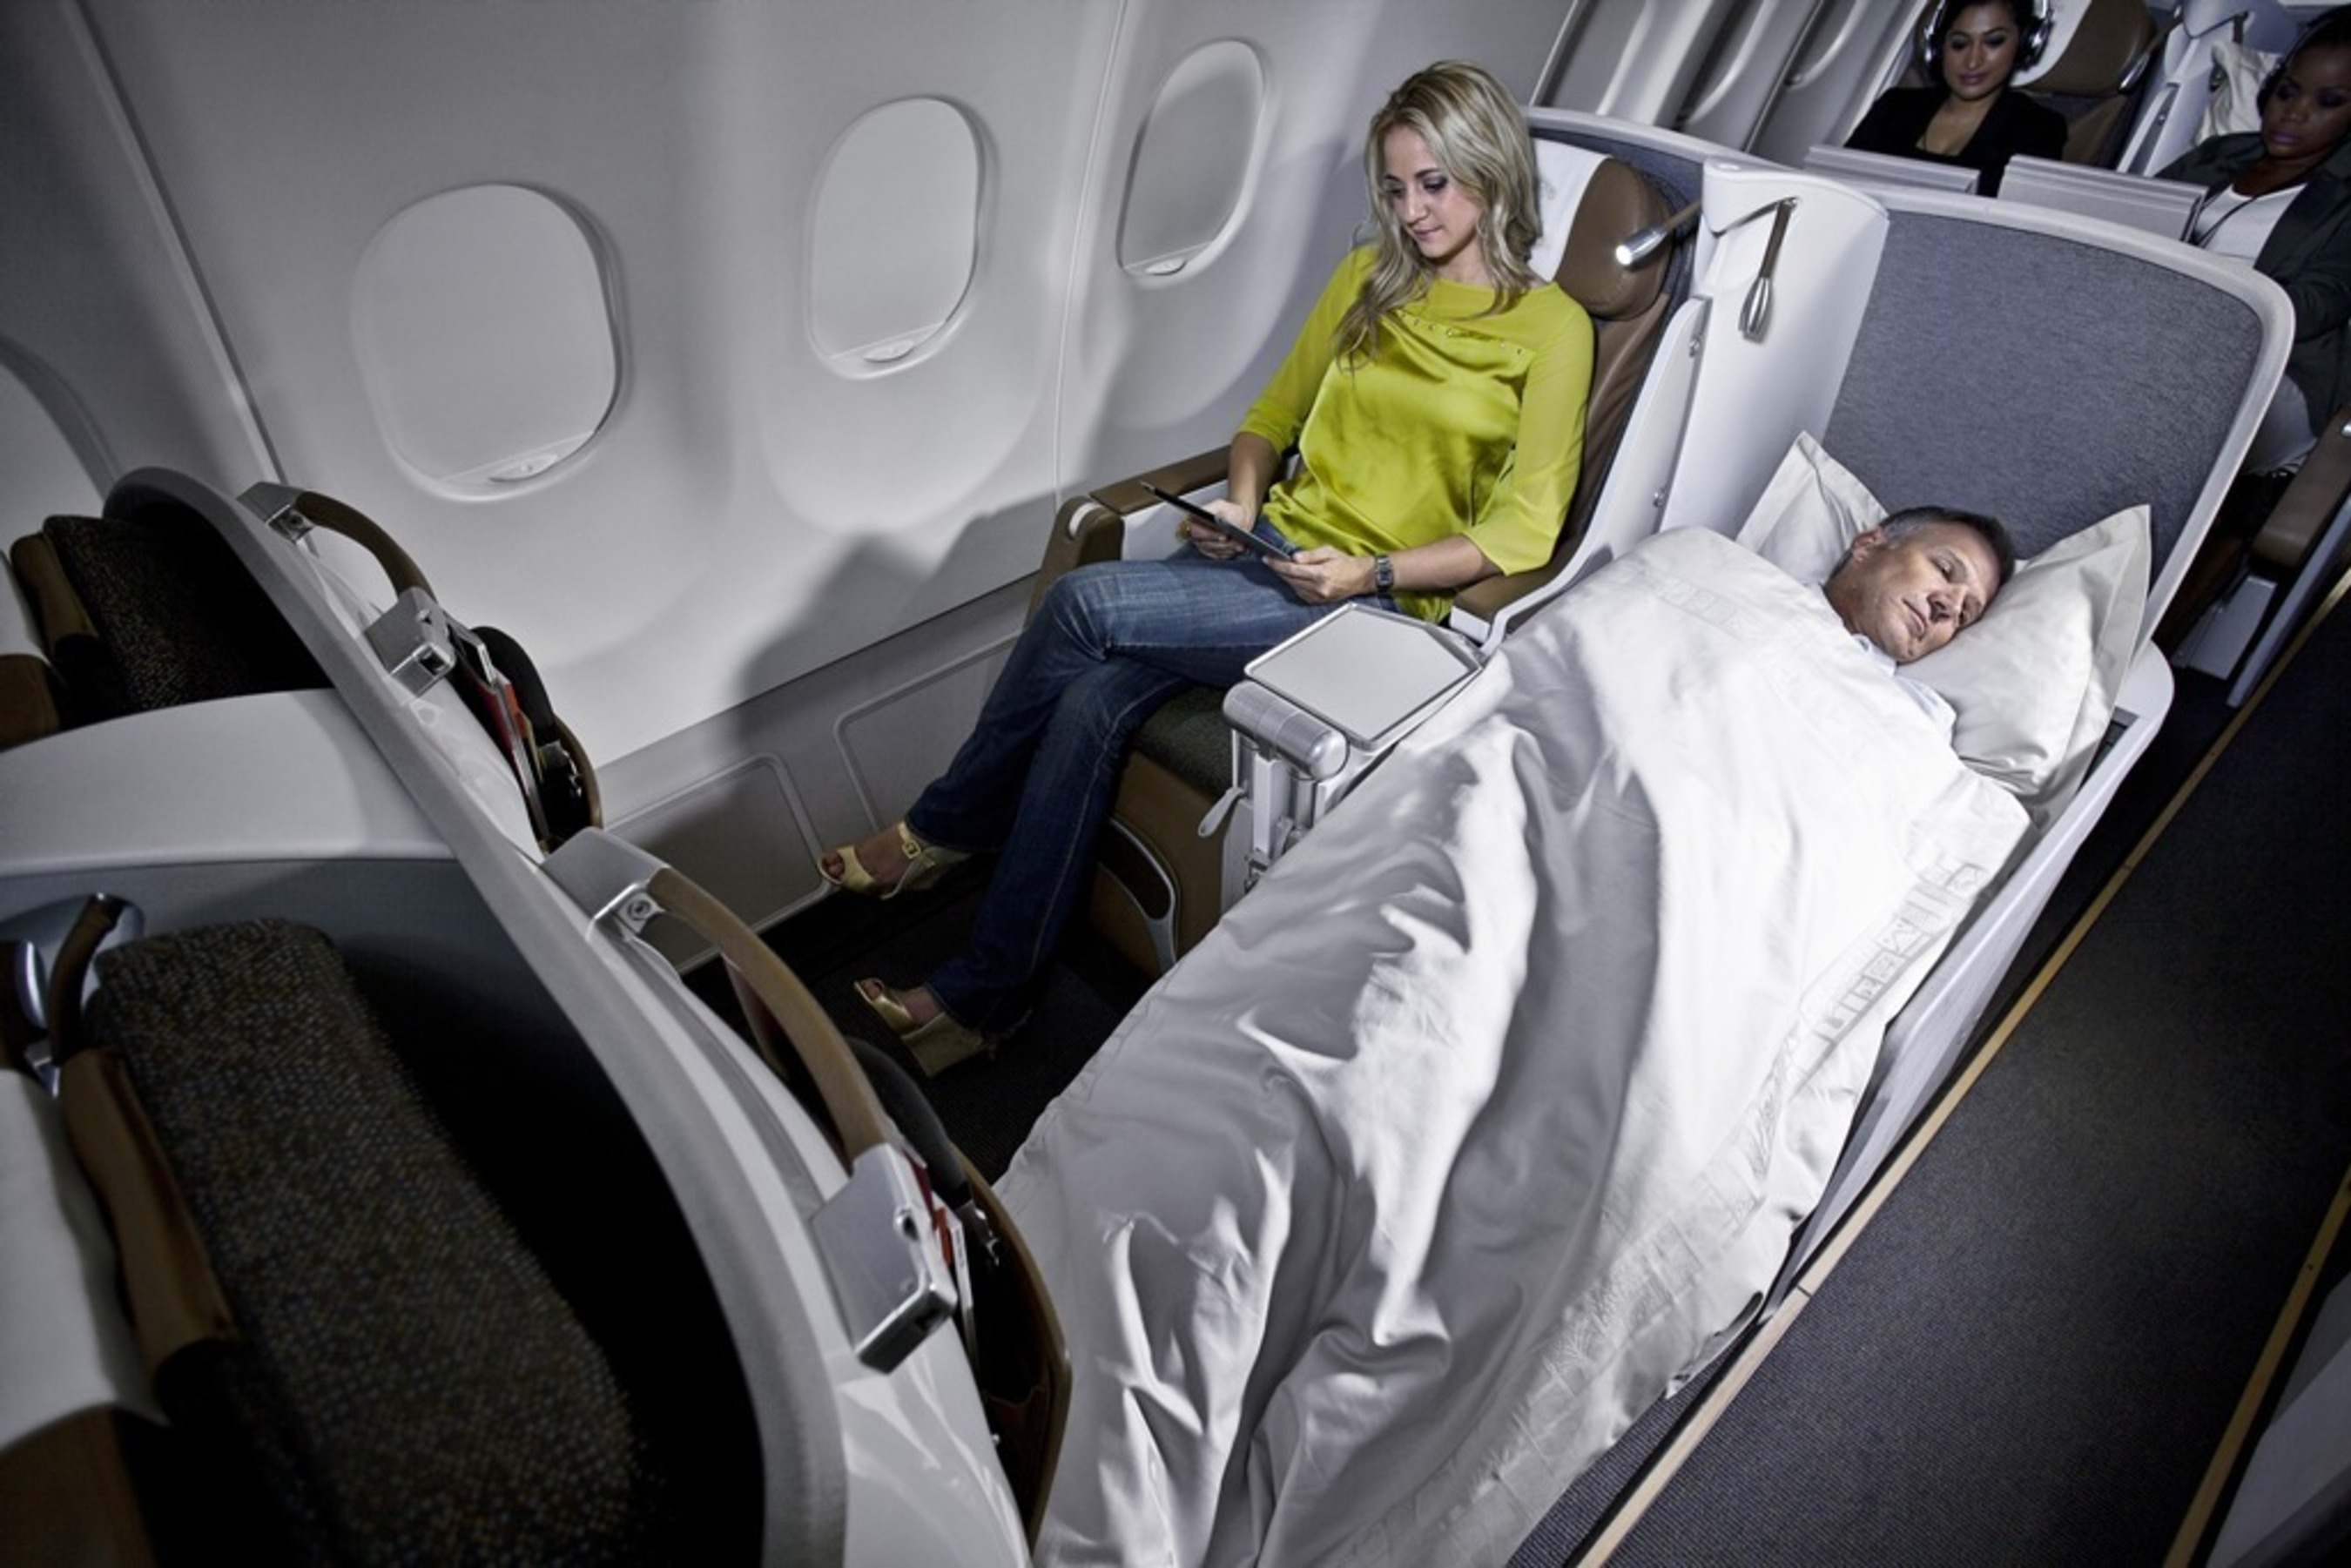 South African Airways Airbus A330-200 Business Class Cabin (PRNewsFoto/South African Airways)